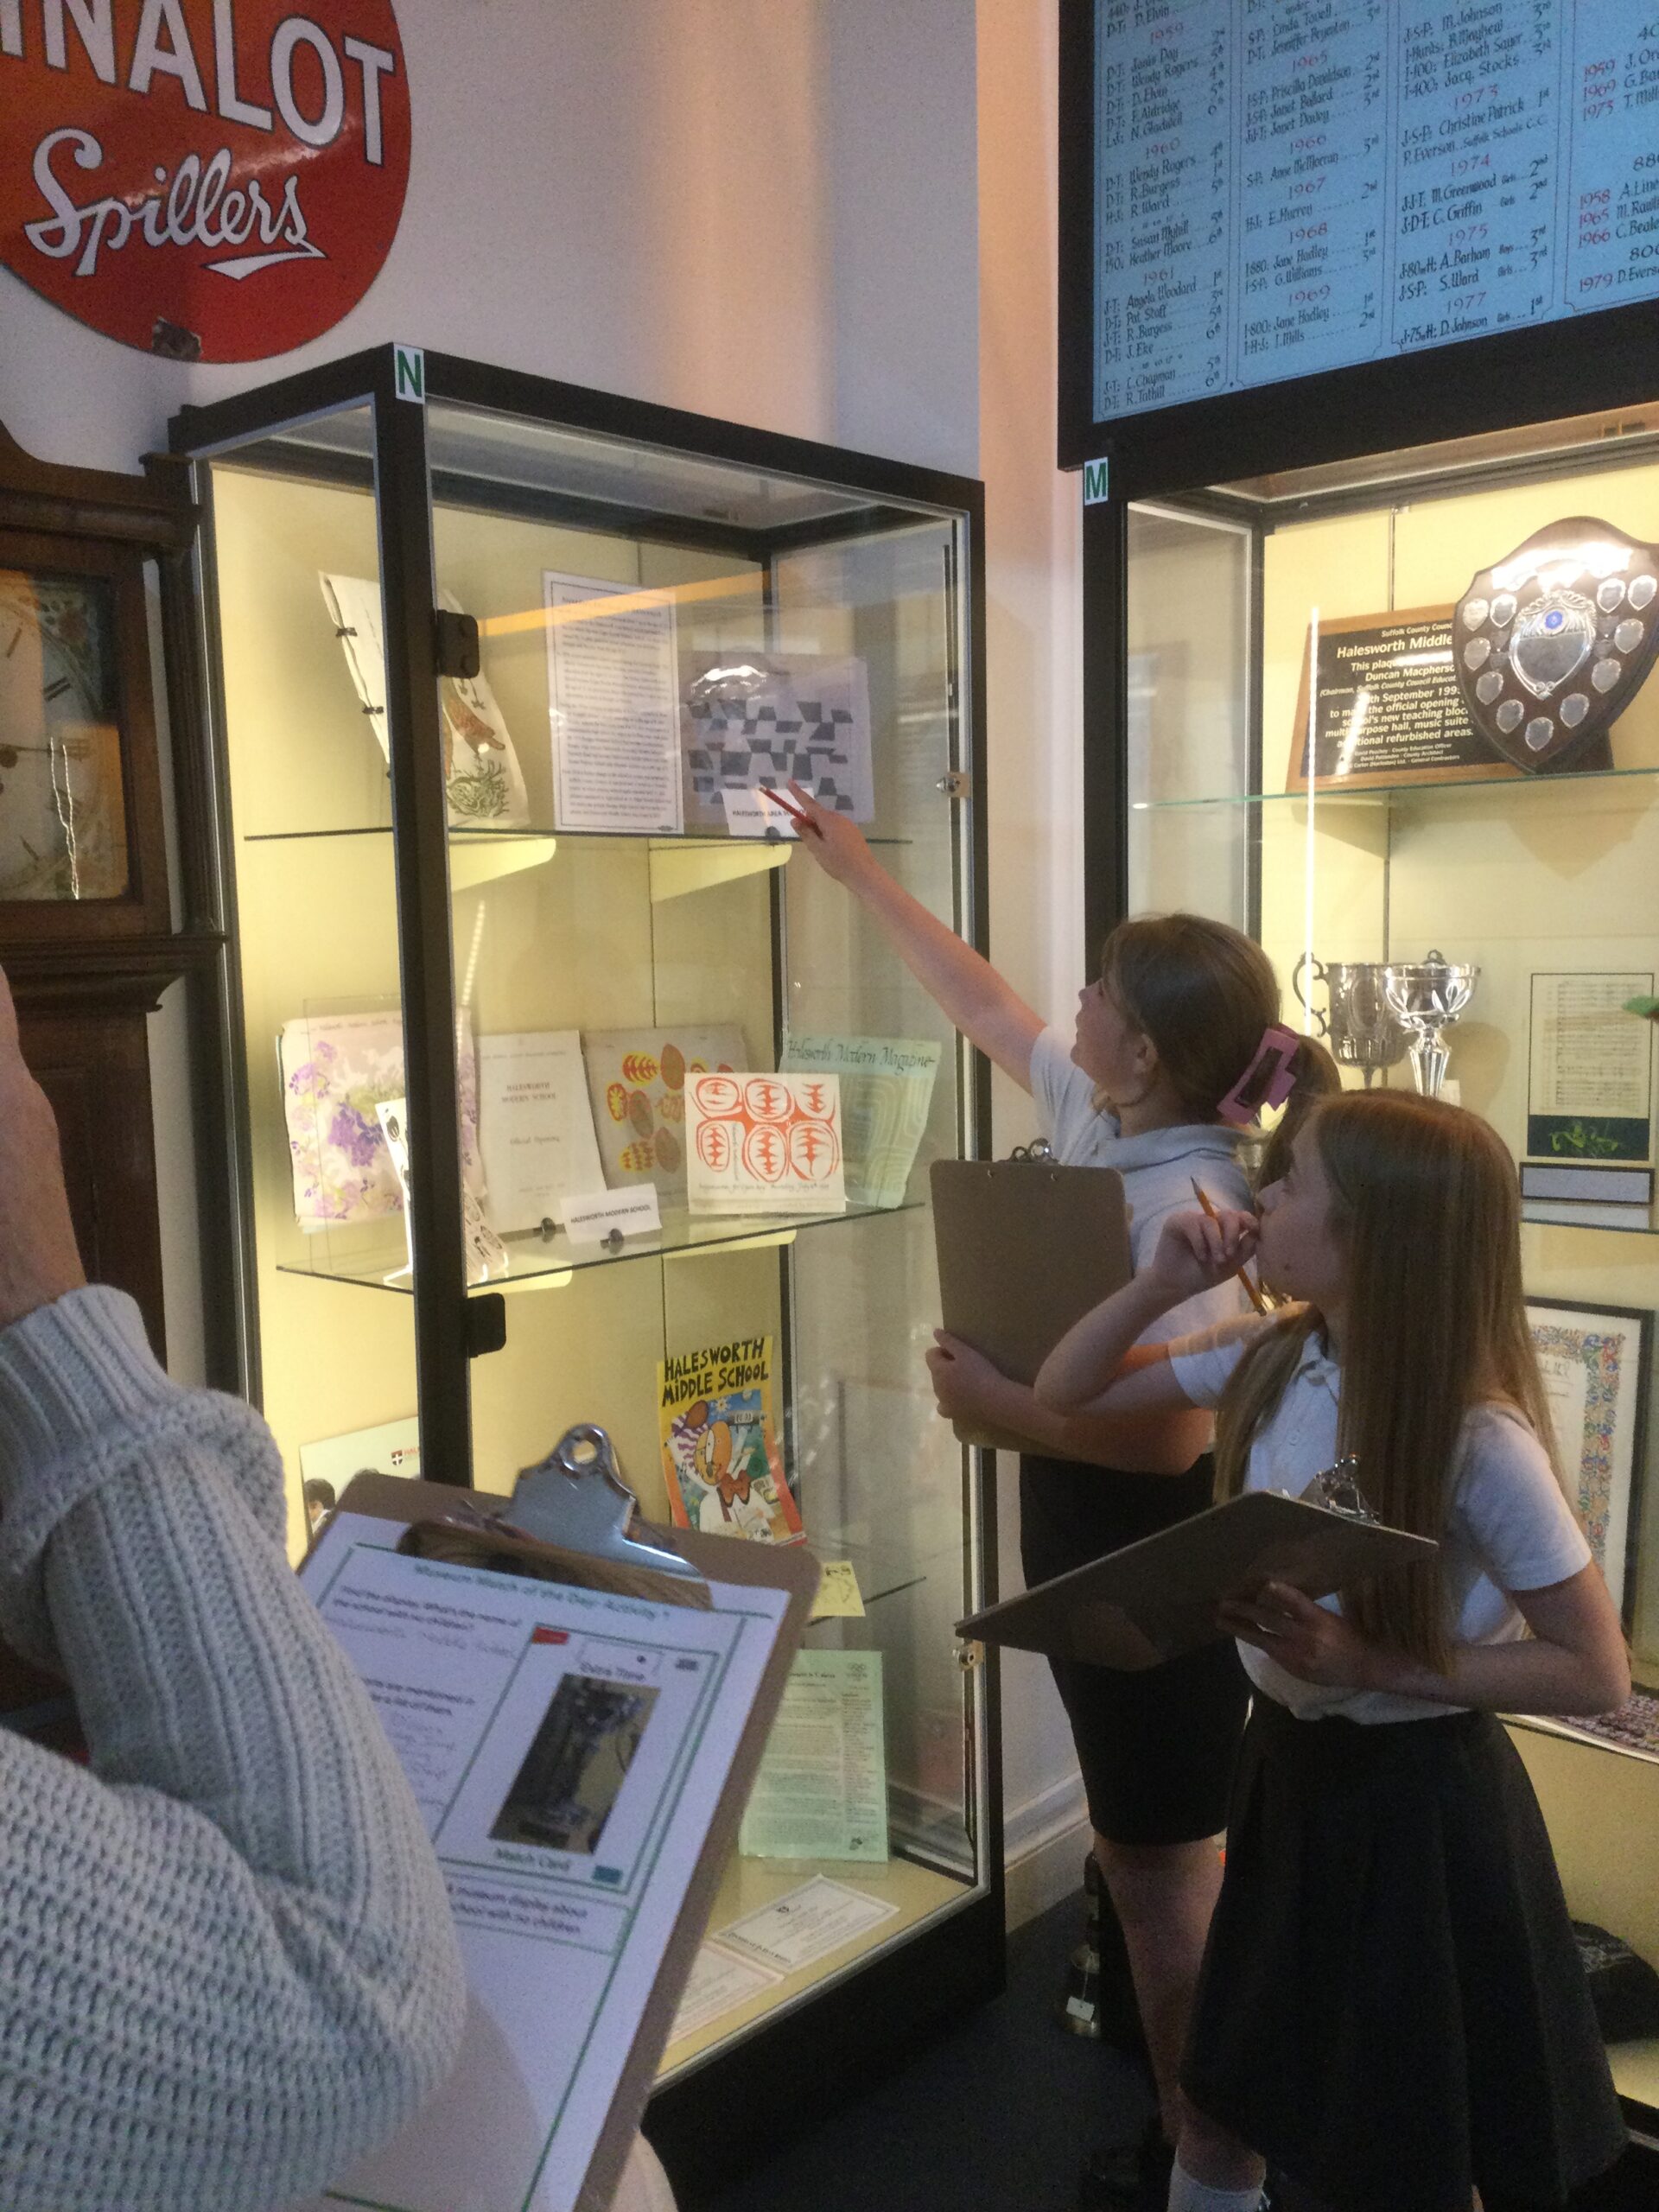 Two school girls pointing to an exhibit in a display case